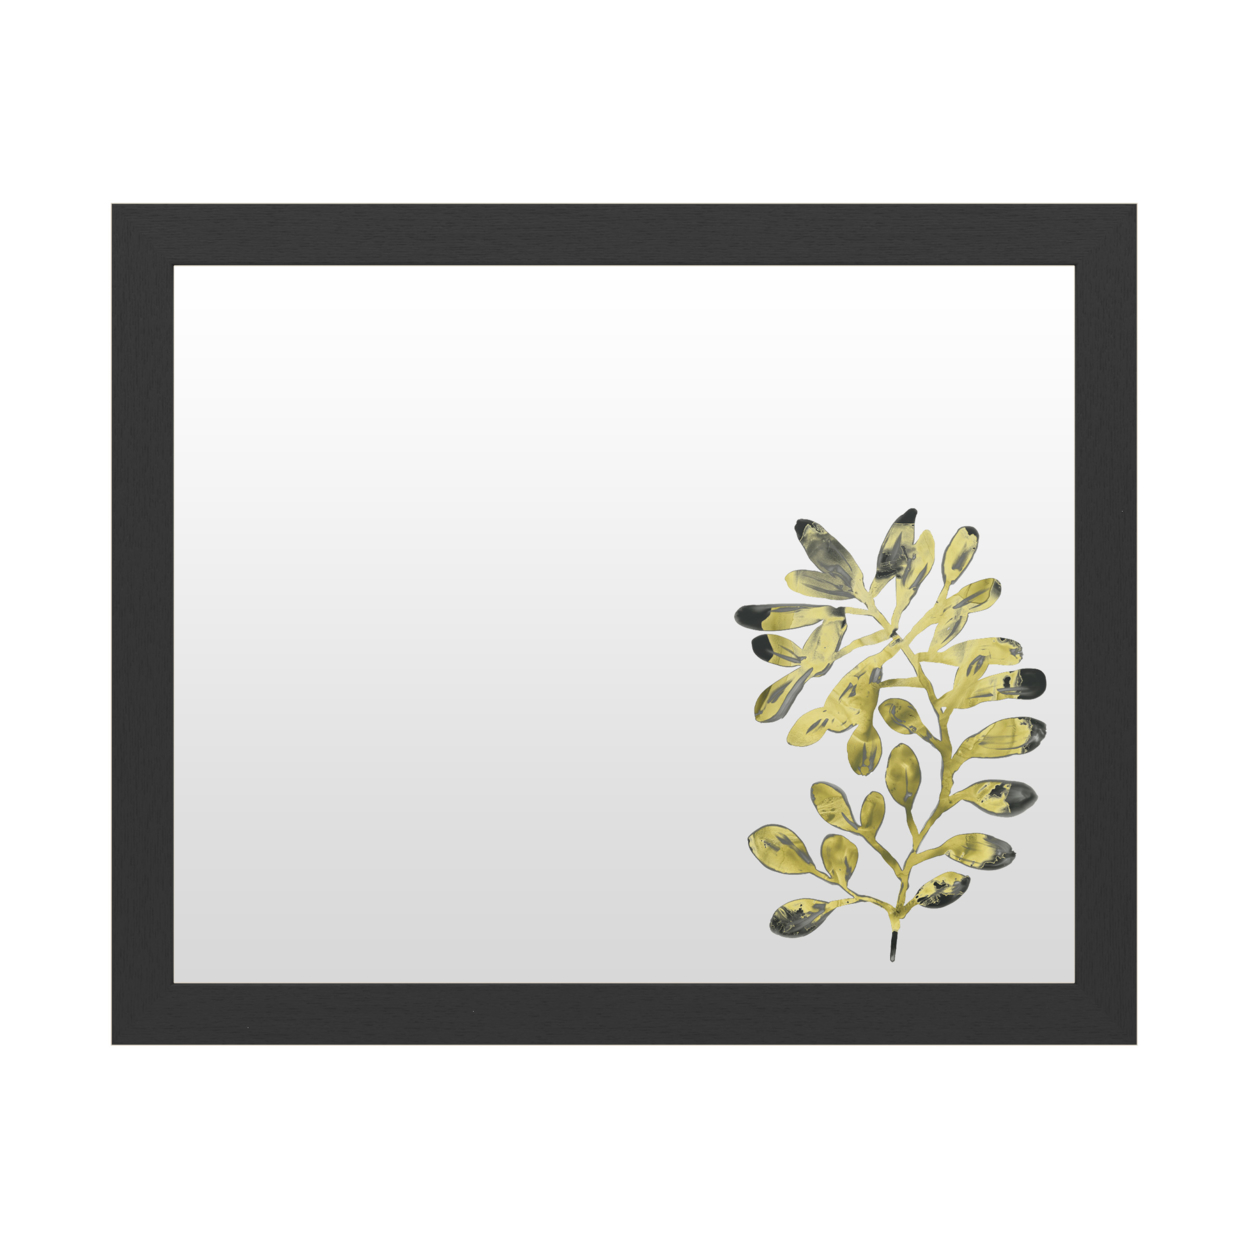 Dry Erase 16 X 20 Marker Board With Printed Artwork - June Erica Vess Foliage Fossil Ii White Board - Ready To Hang